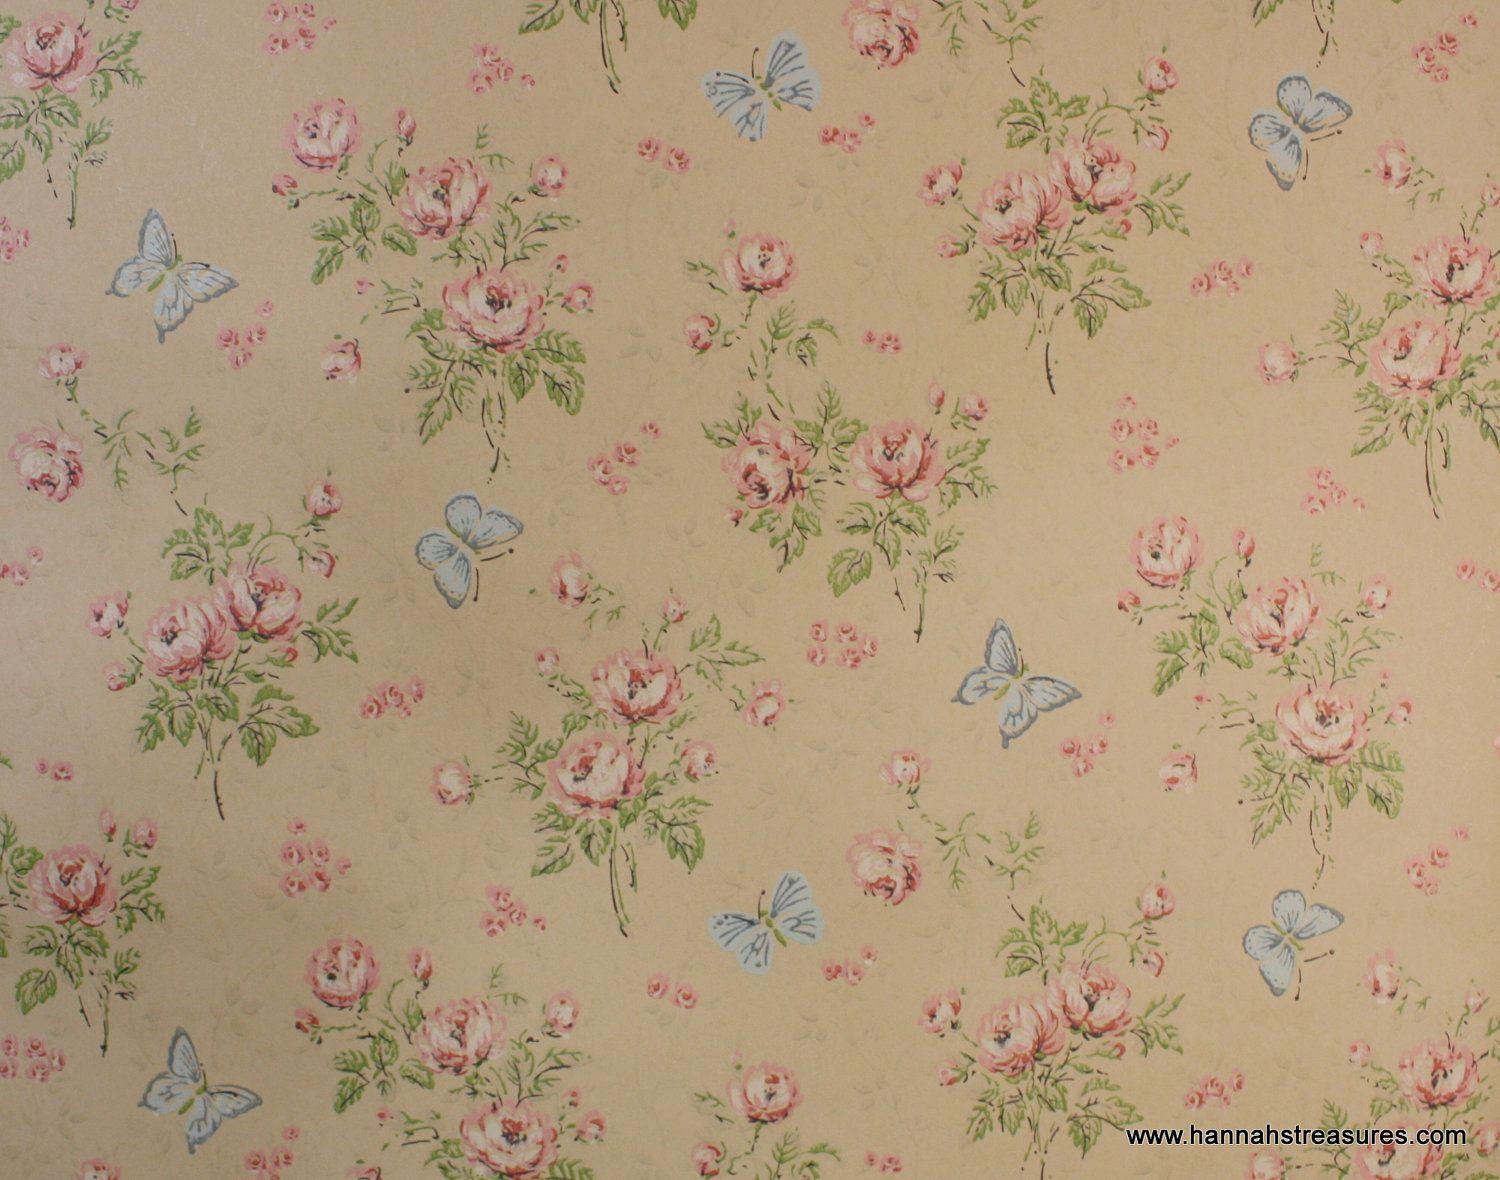 1950s Floral Vintage Style Pattern Design - Wall Paper 1950 , HD Wallpaper & Backgrounds